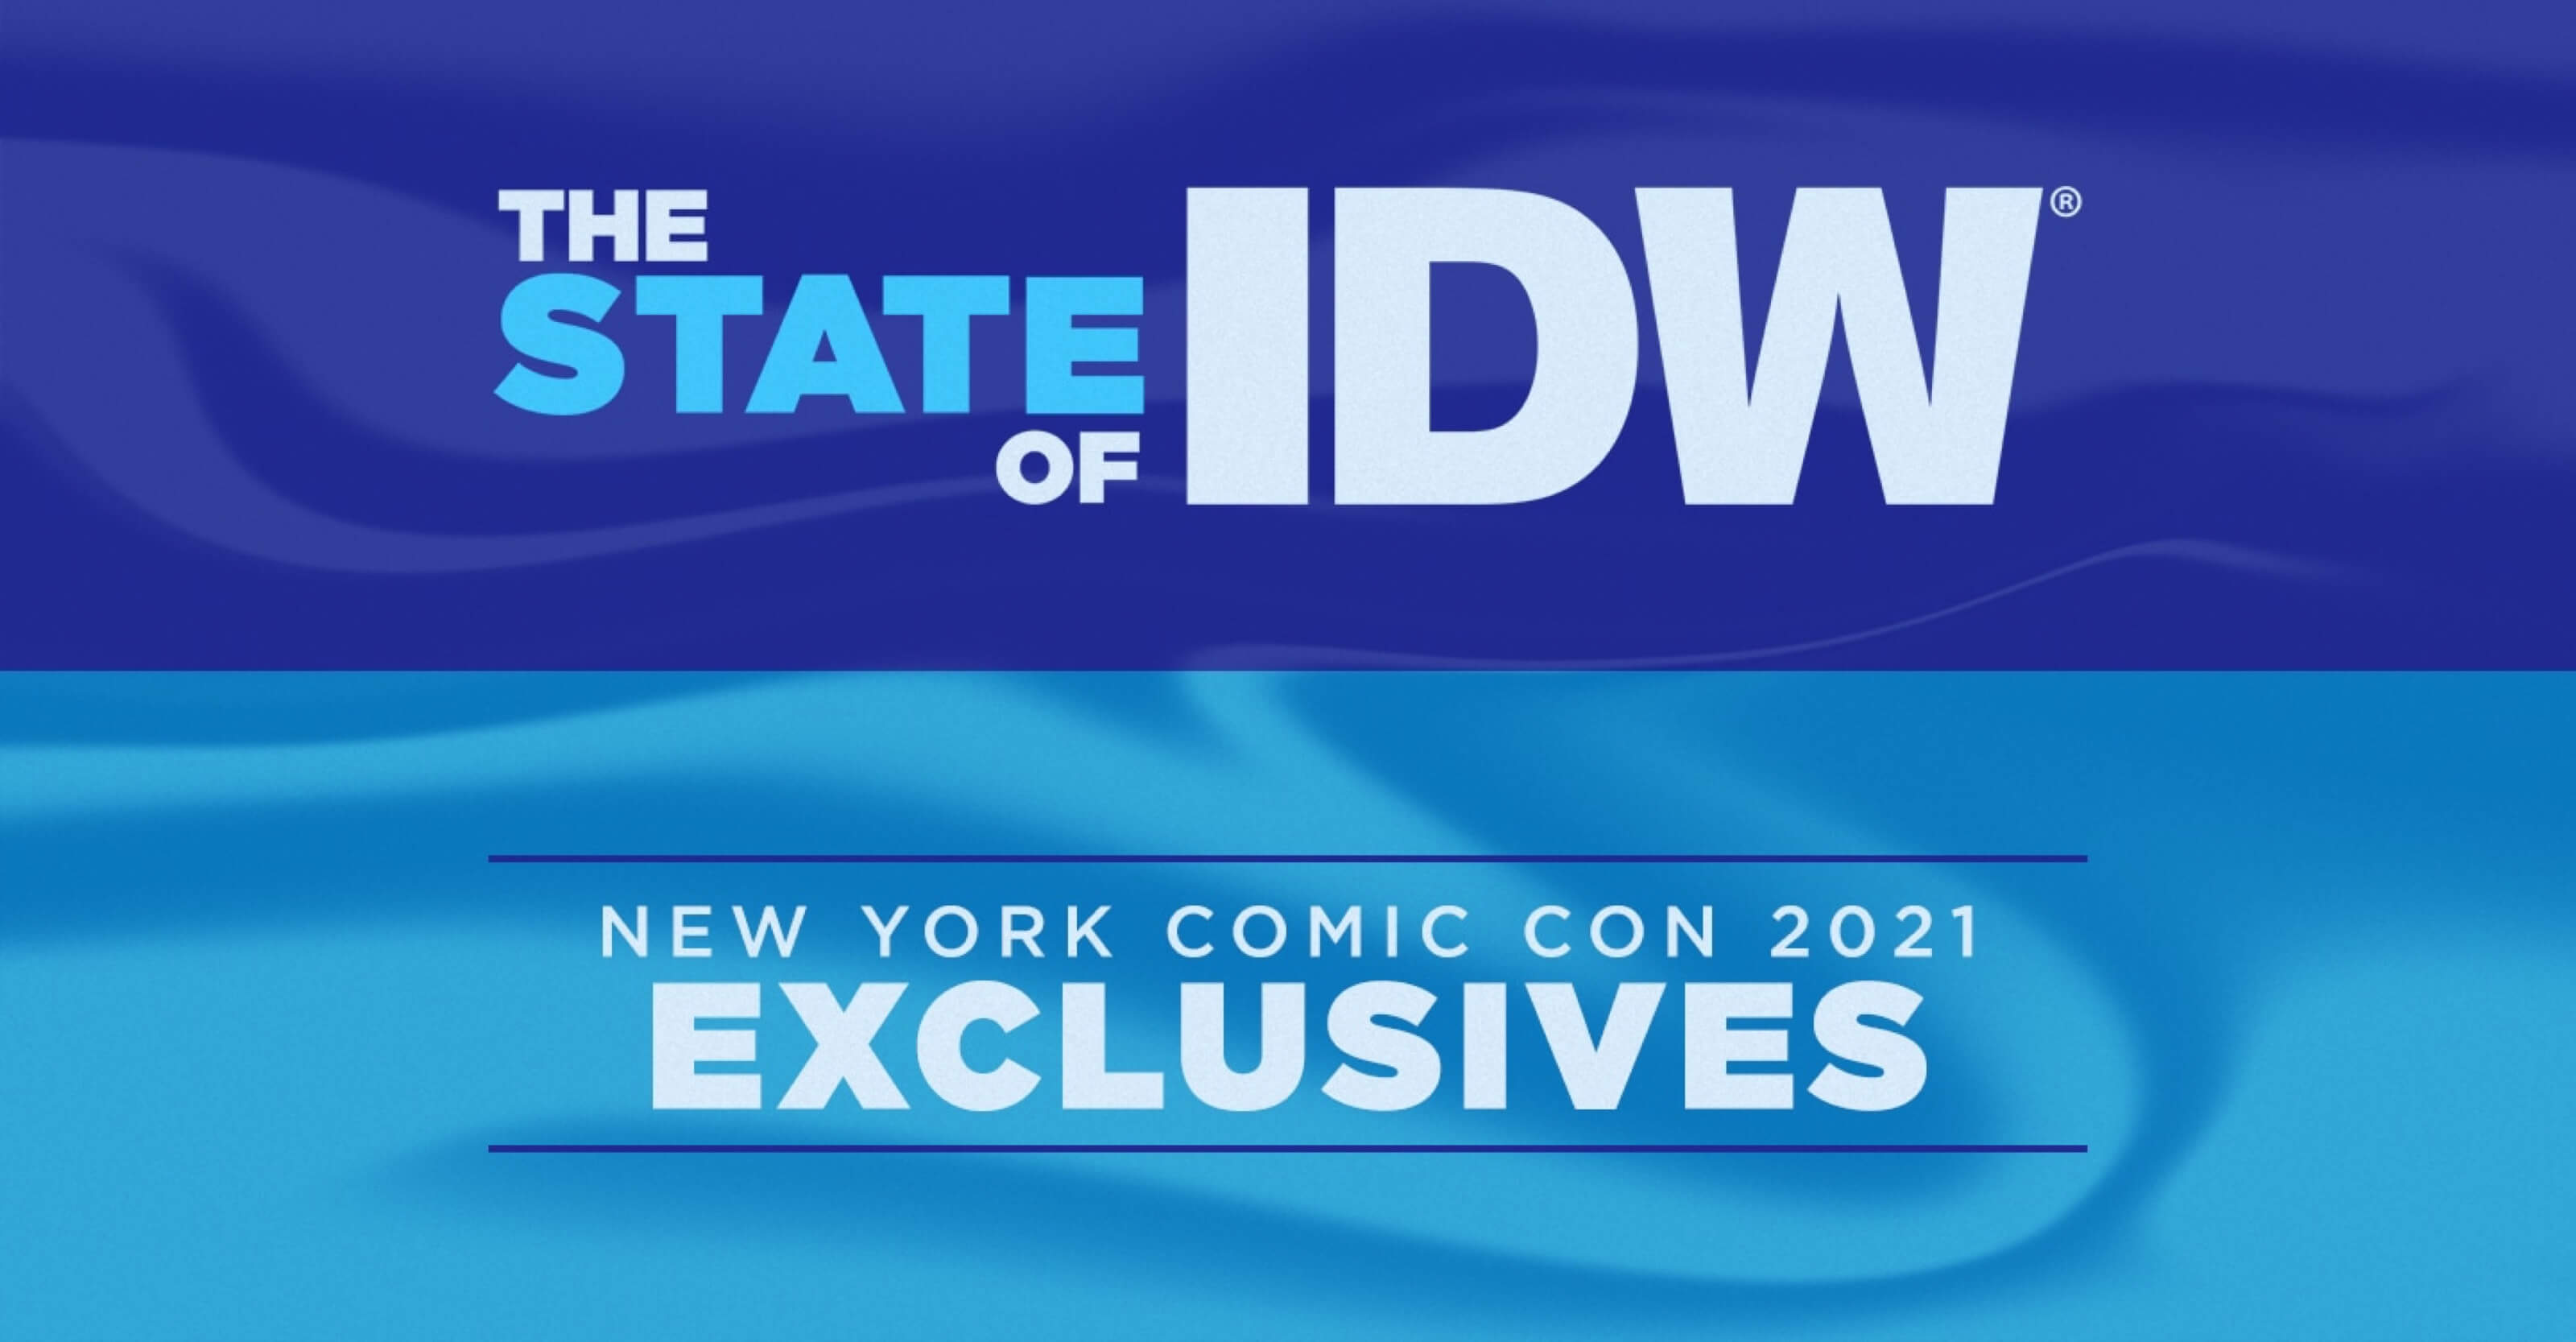 "State of IDW" Livestream Event Hosted by the Sensational Sam Maggs Reveals Red-Hot Exclusives for New York Comic Con